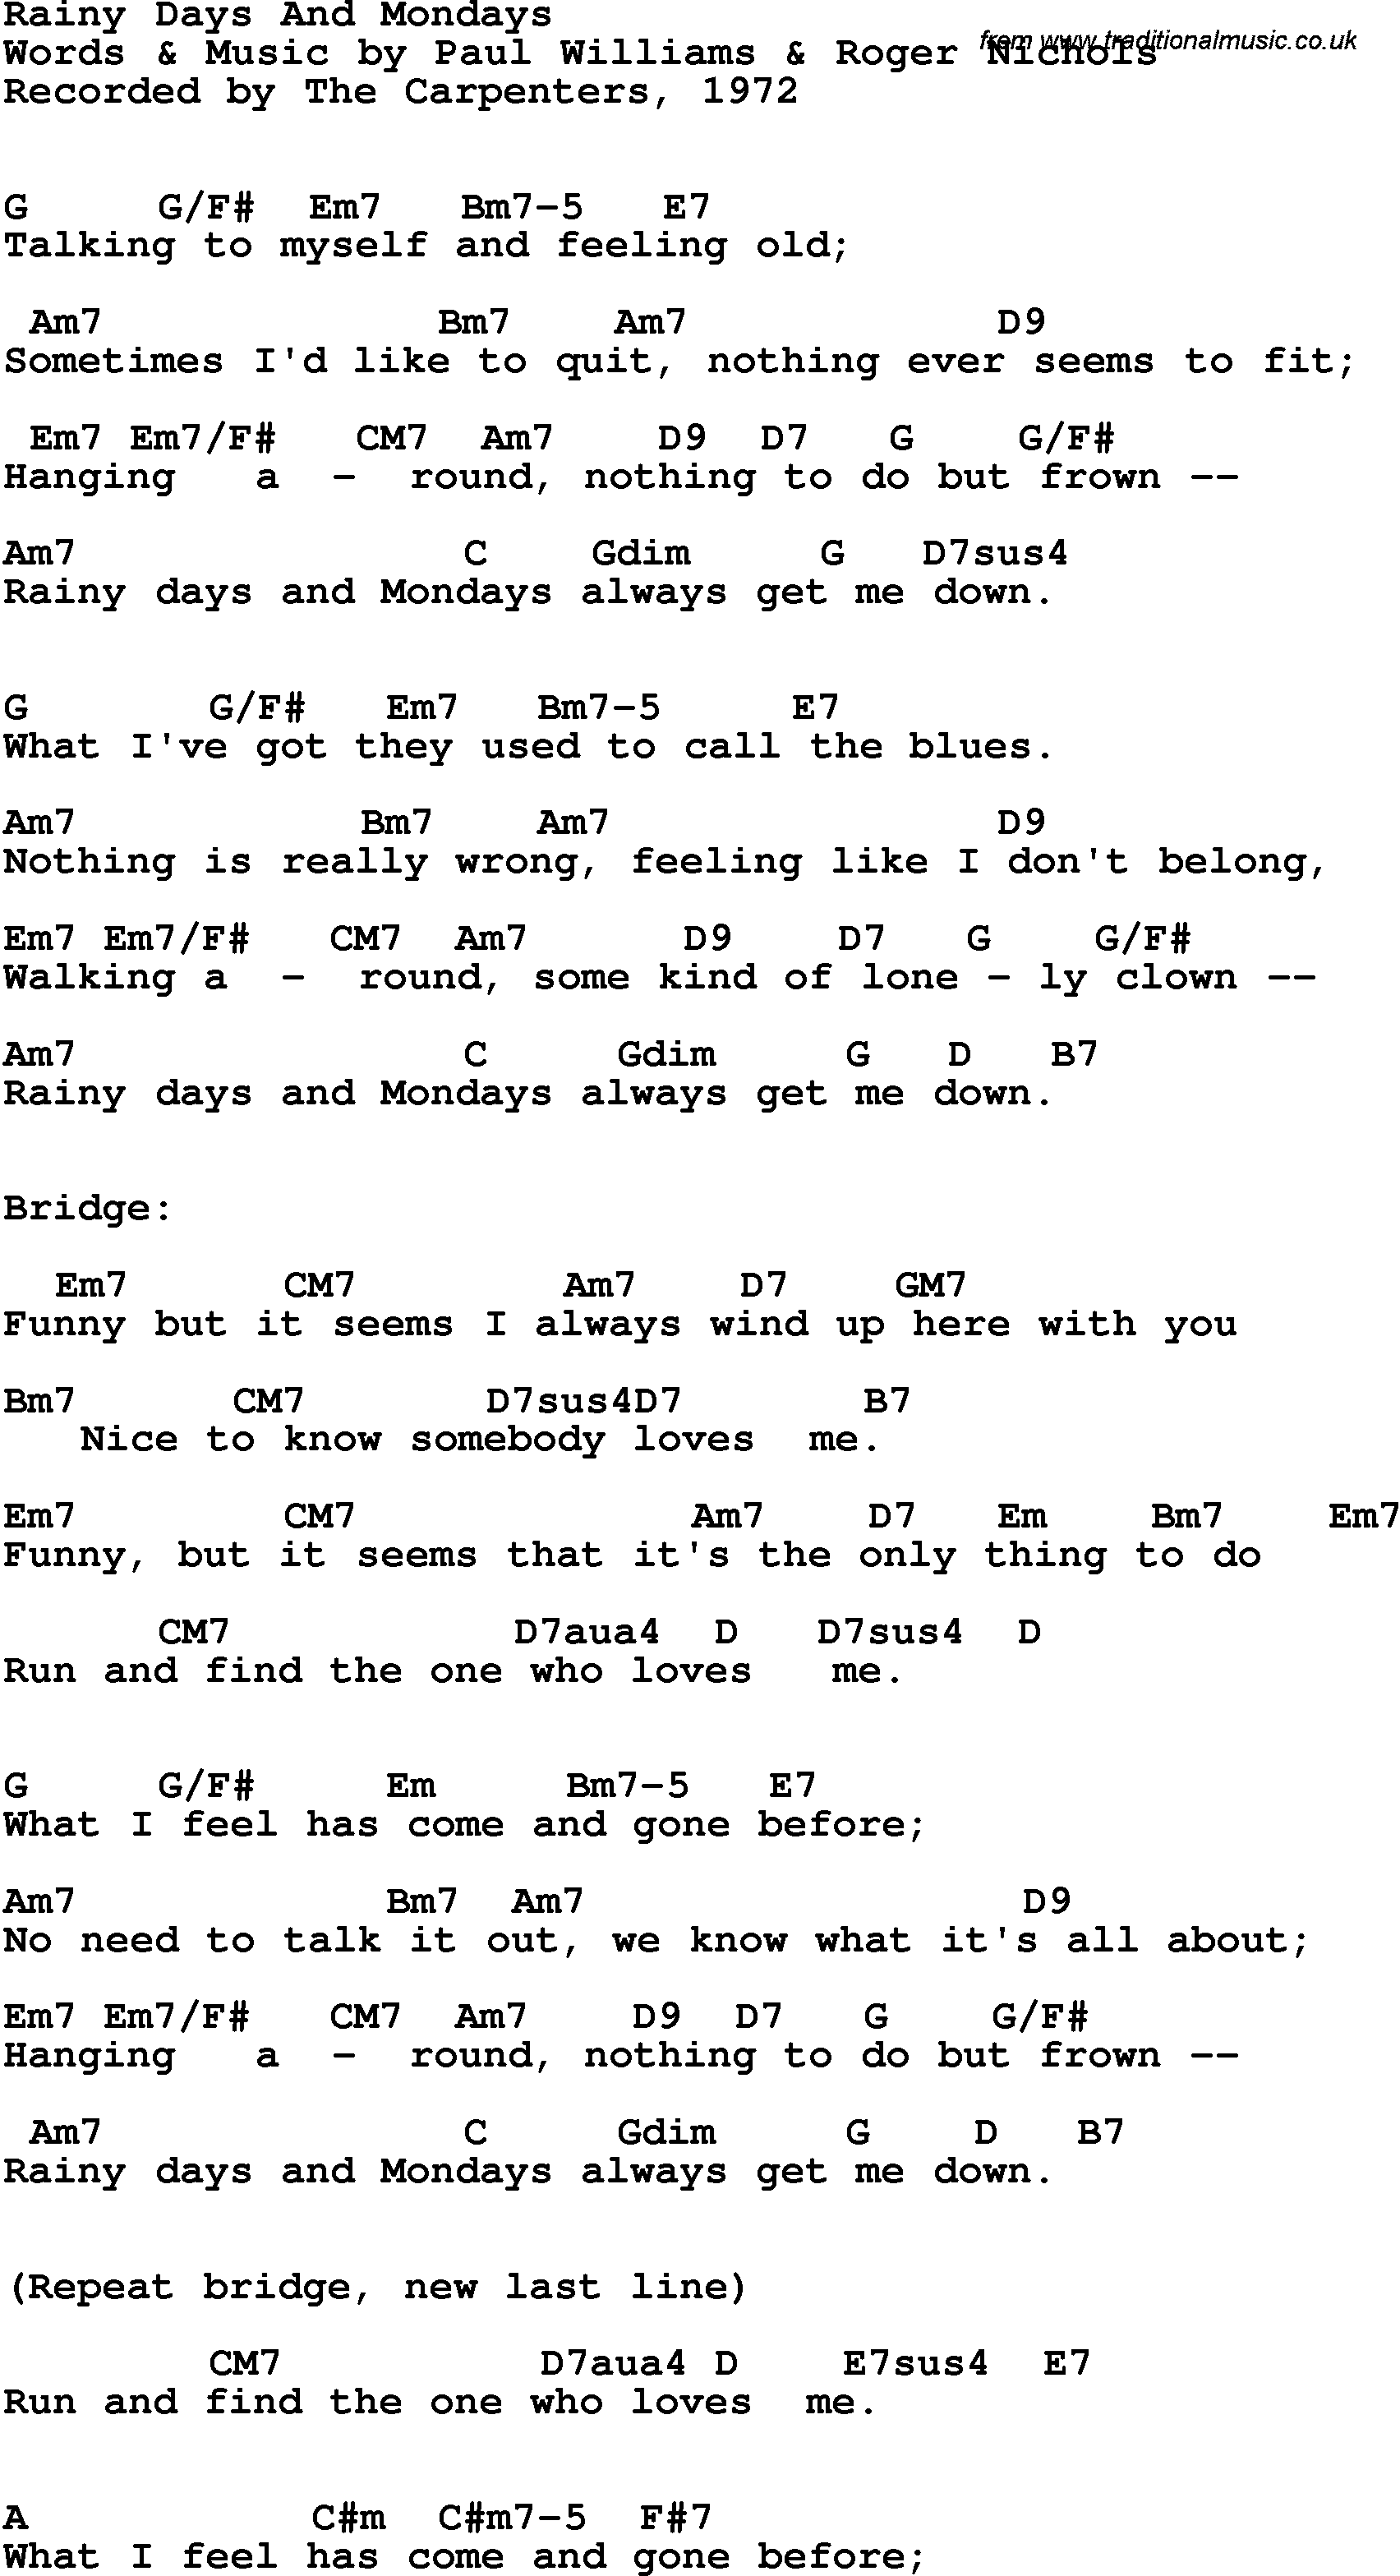 Song Lyrics with guitar chords for Rainy Days And Mondays - The Carpenters, 1972